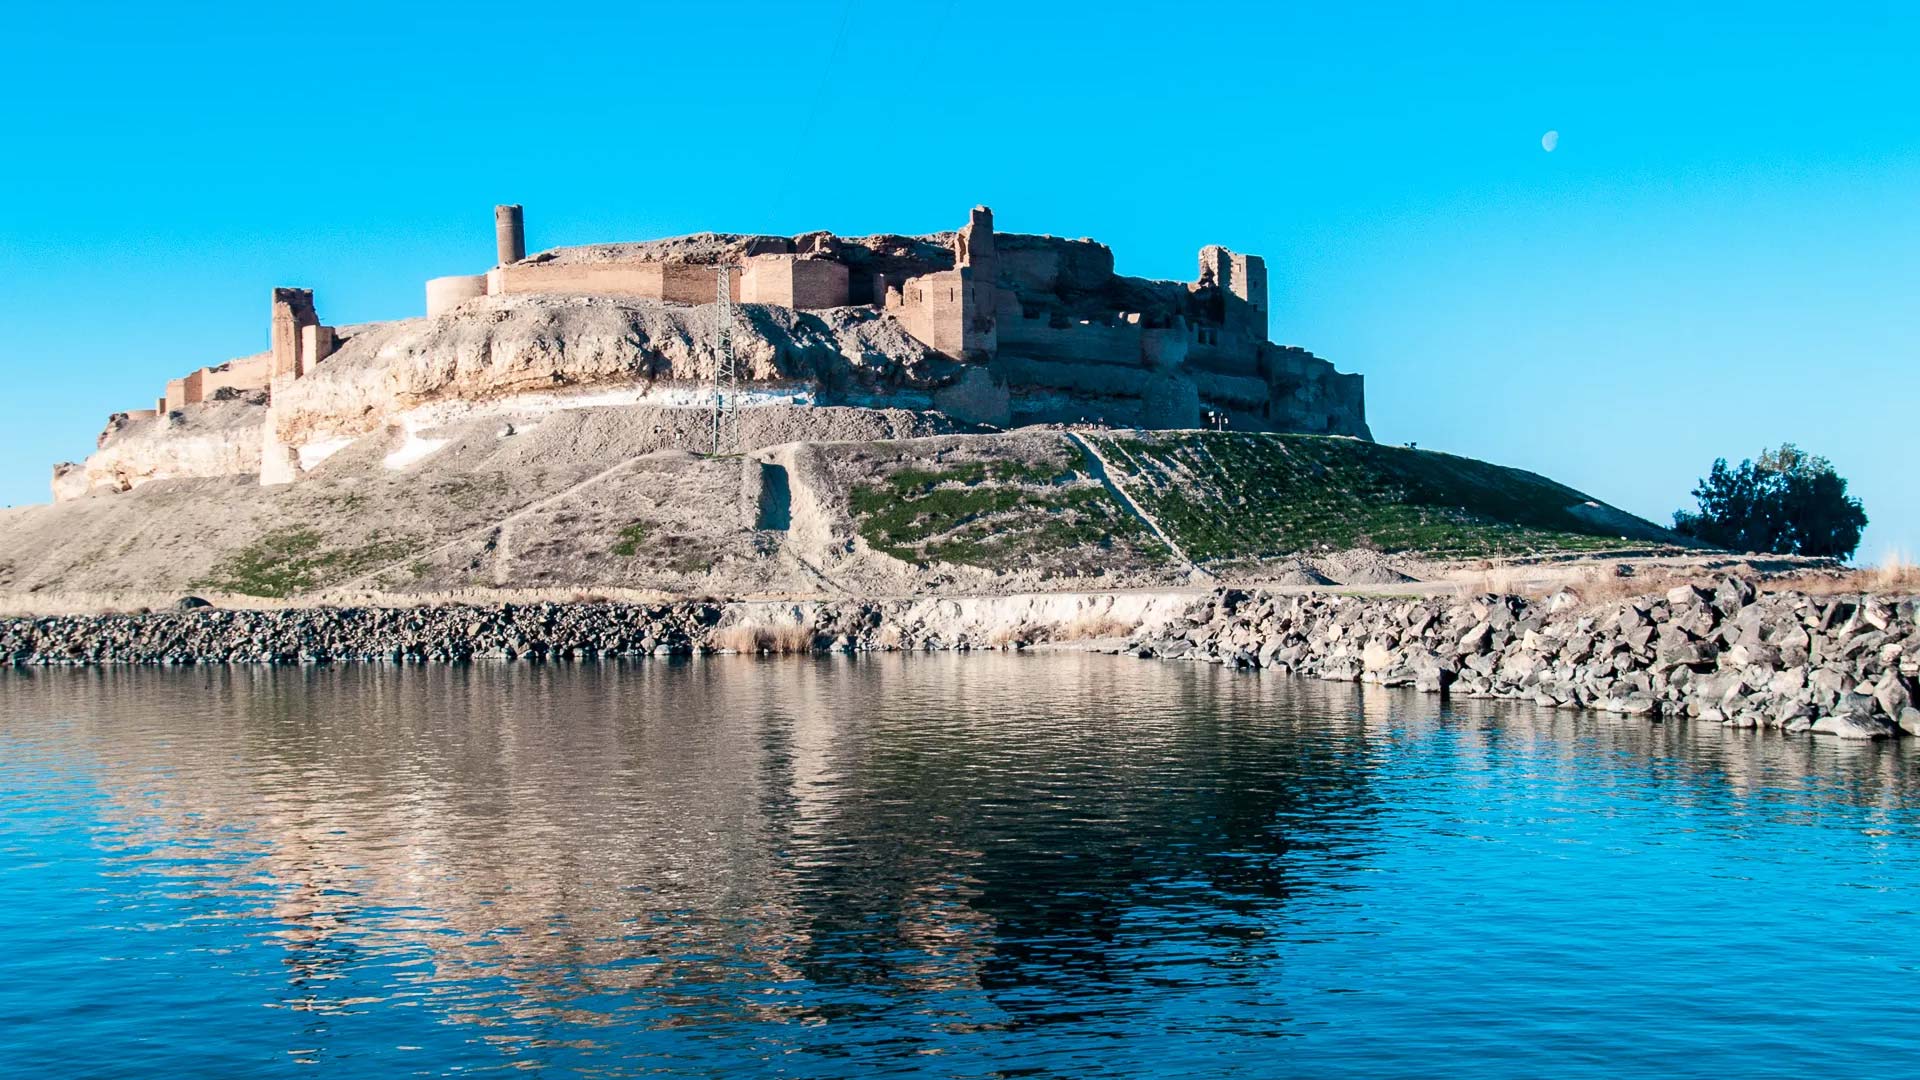 The expansive view of Jabar Castle, an awe-inspiring fortress located in the Raqqa region of Syria, is complemented by the surrounding waters of Assad Lake, creating a captivating panoramic vista.